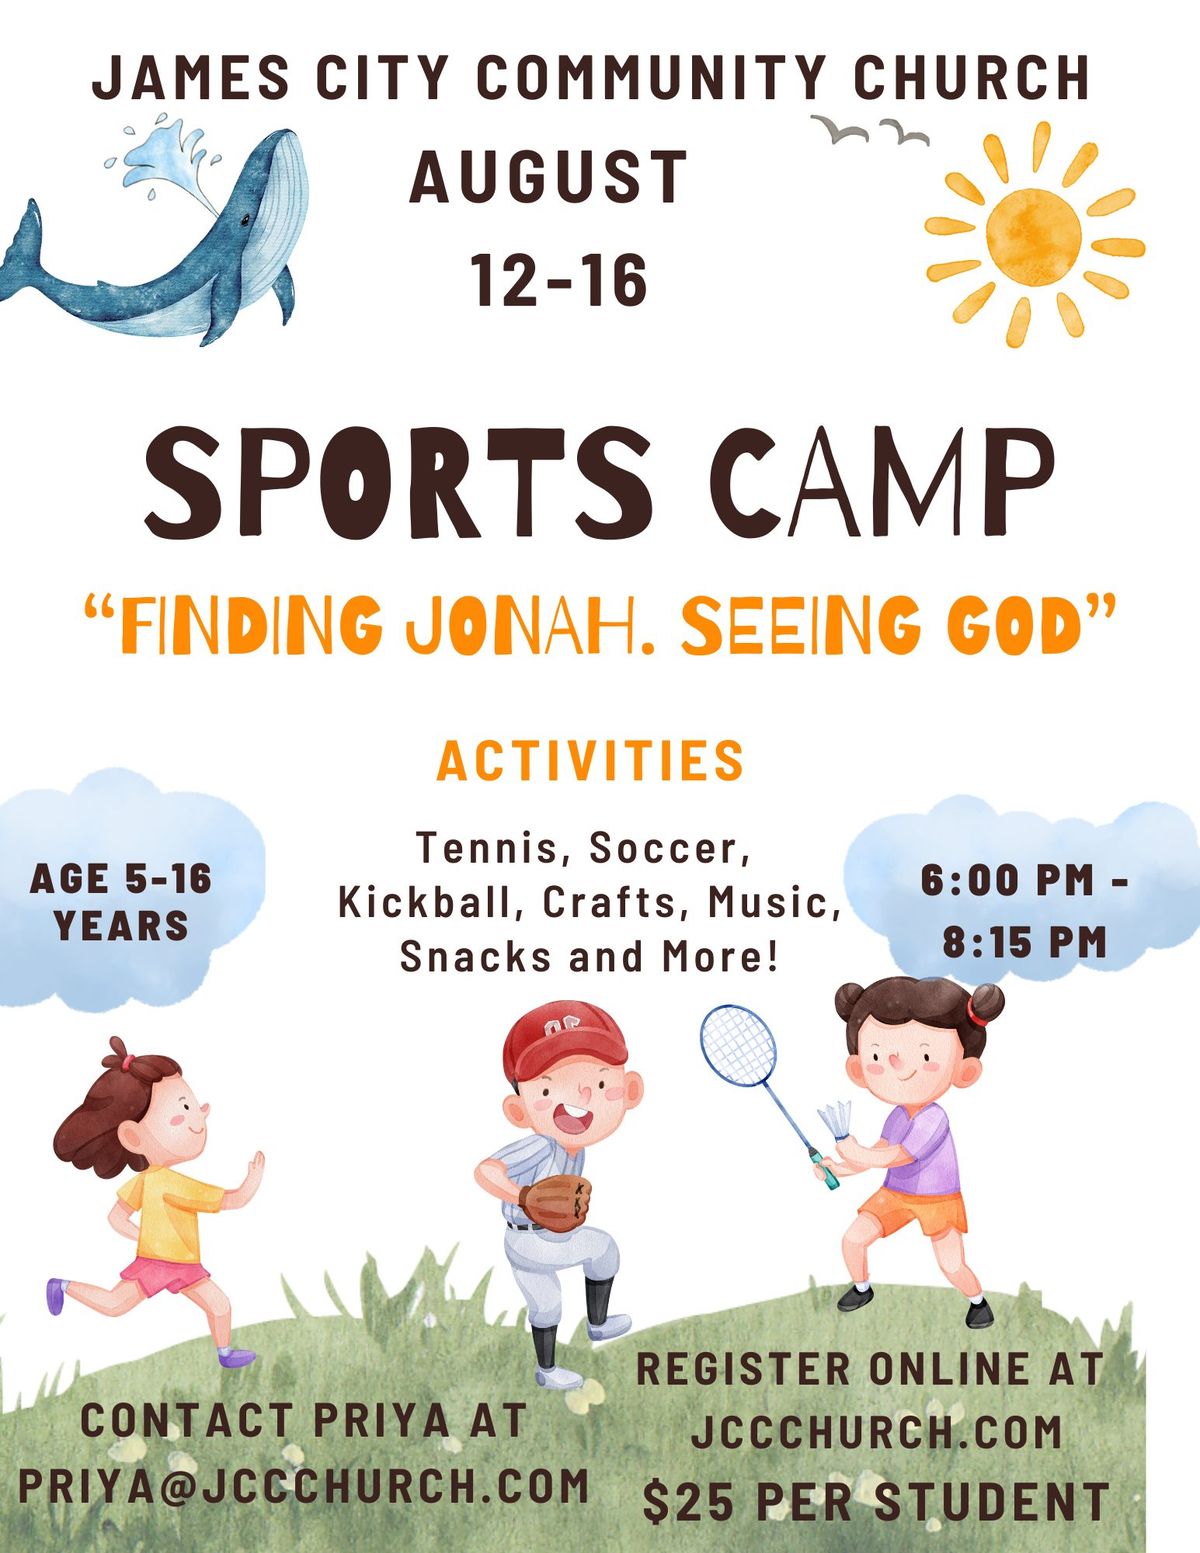 SUMMER SPORTS CAMP, AUGUST 12-16, 6:00 PM-8:15 PM 